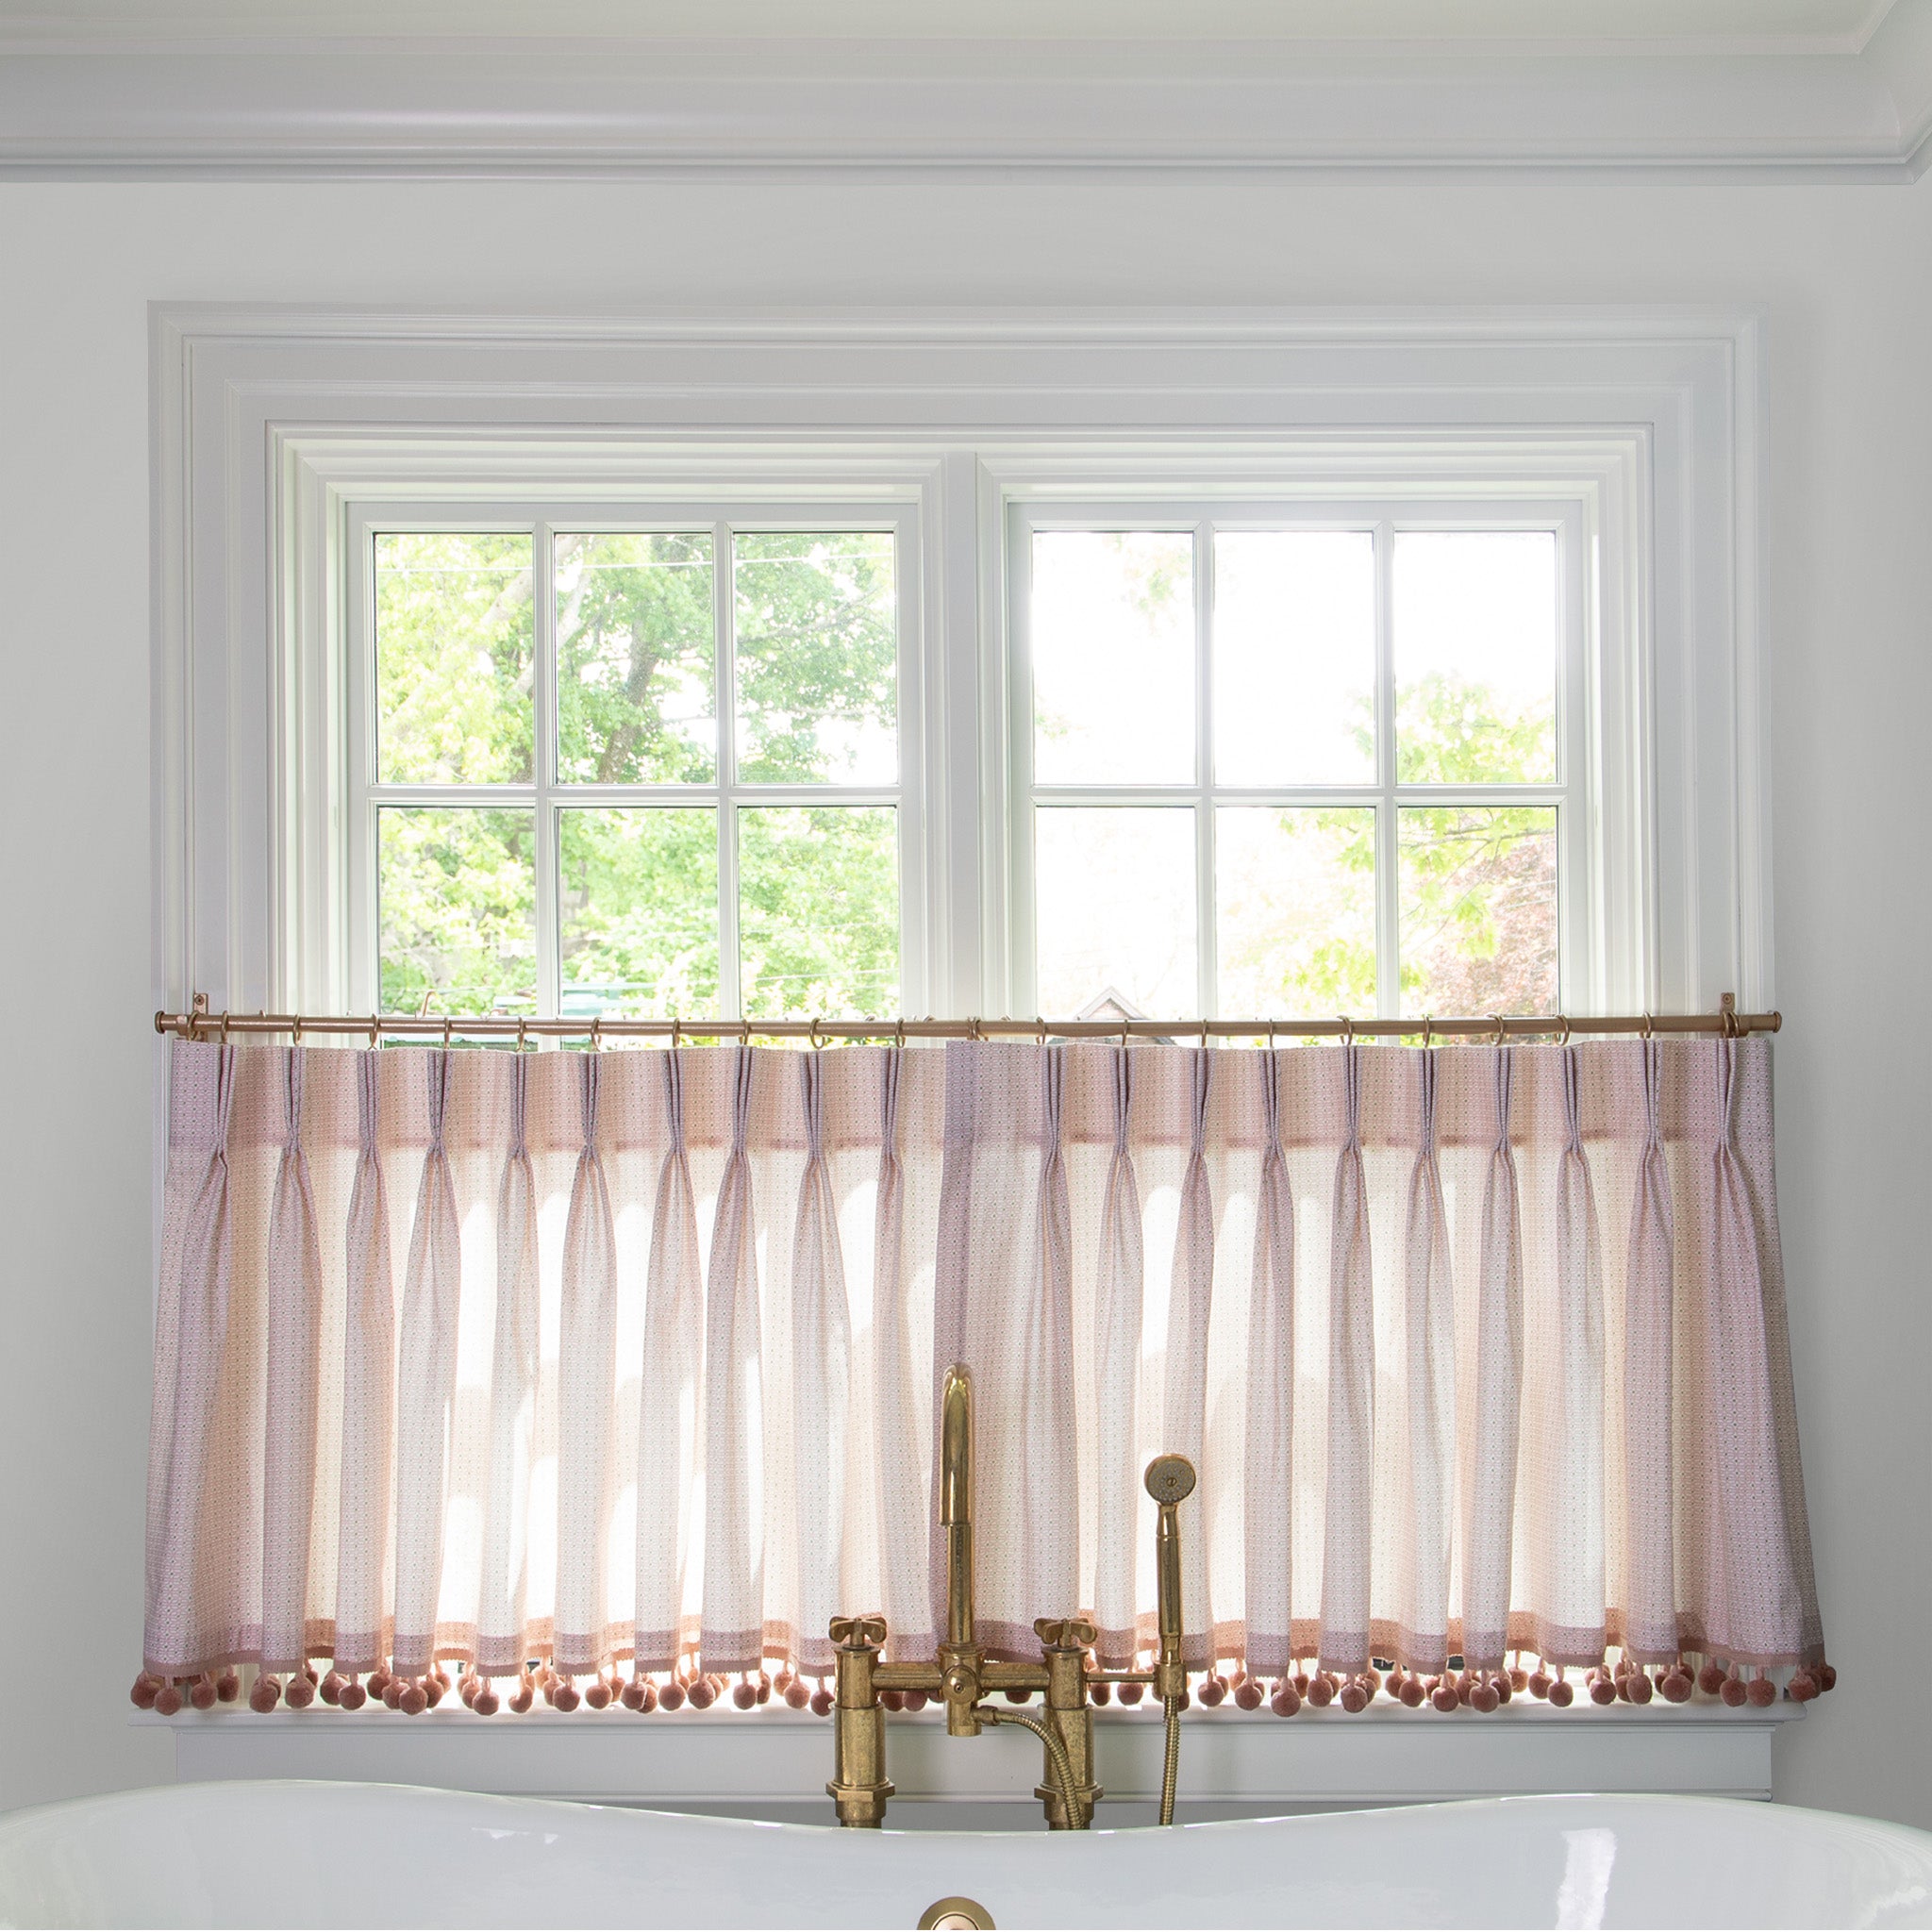 Pink Geometric Printed Cotton curtain on a metal rod in front of an illuminated window in a bathroom